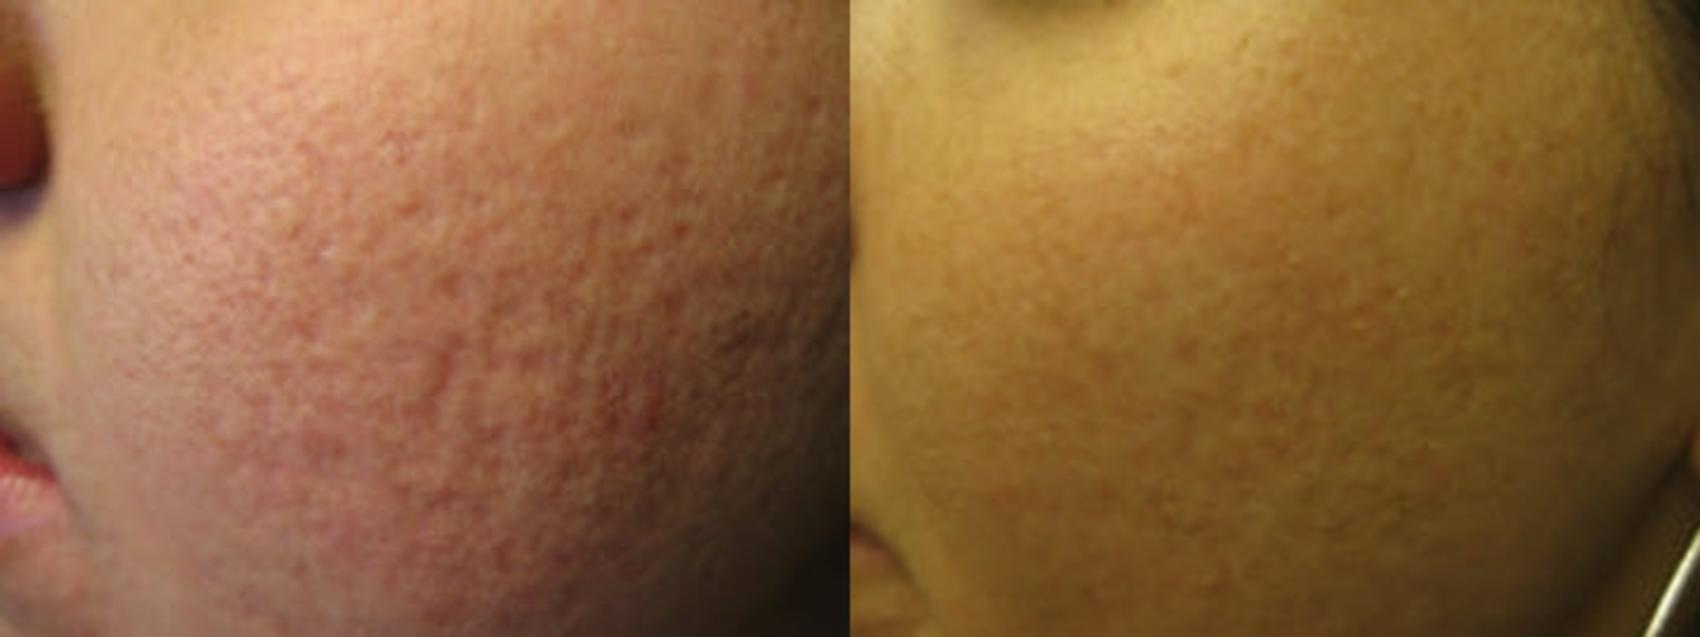 Fraxel Re:Store Laser Treatment Before & After Photo | San Francisco, CA | Kaiser Permanente Cosmetic Services